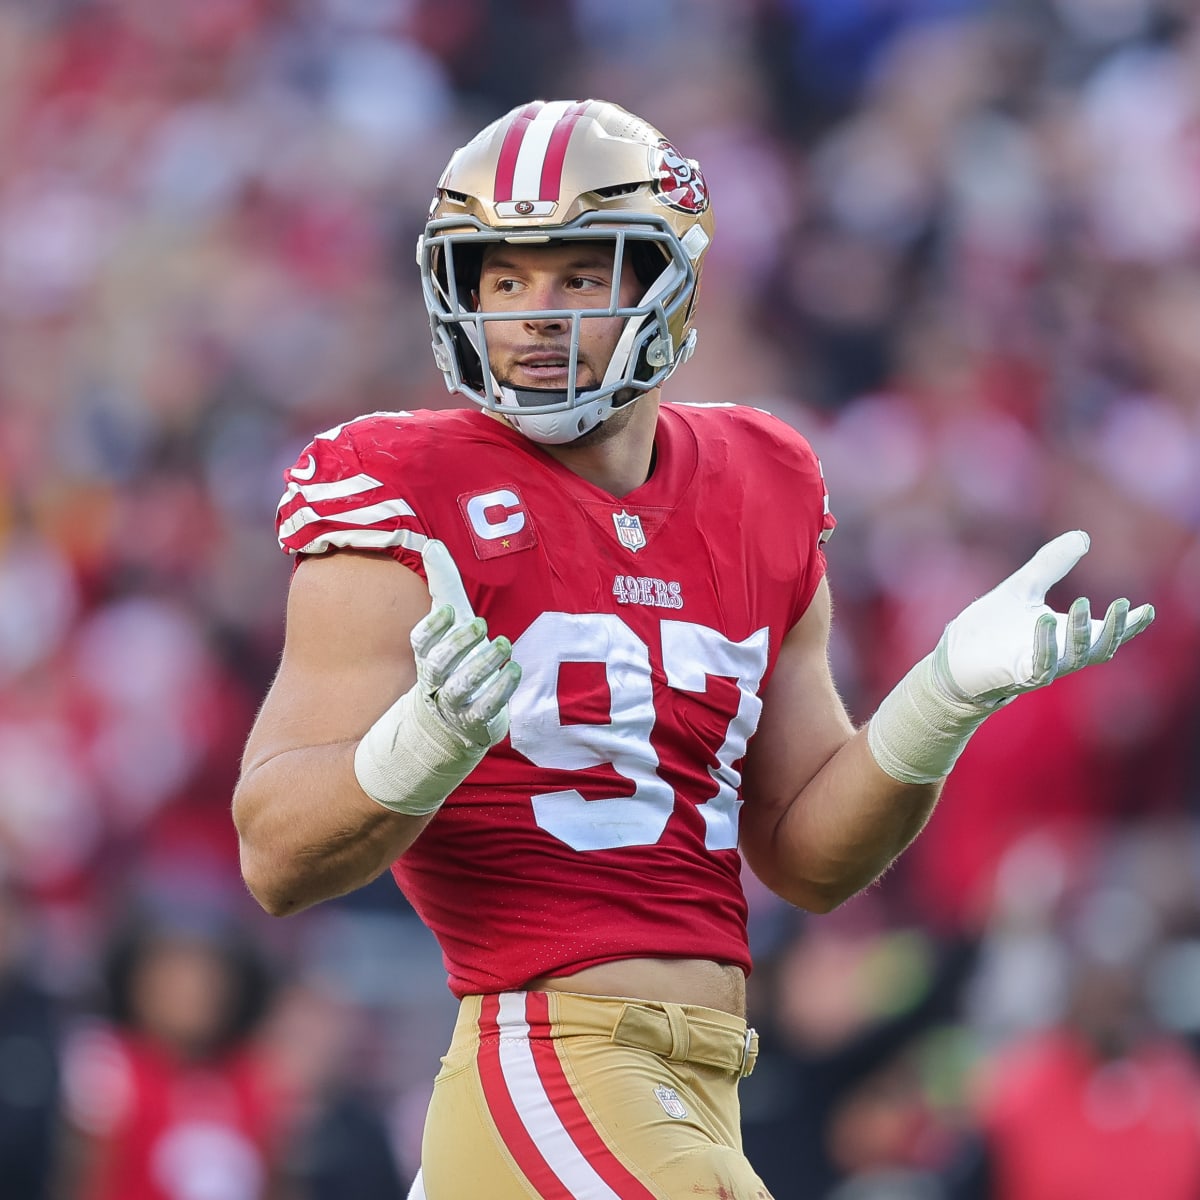 Extension Candidate: Nick Bosa